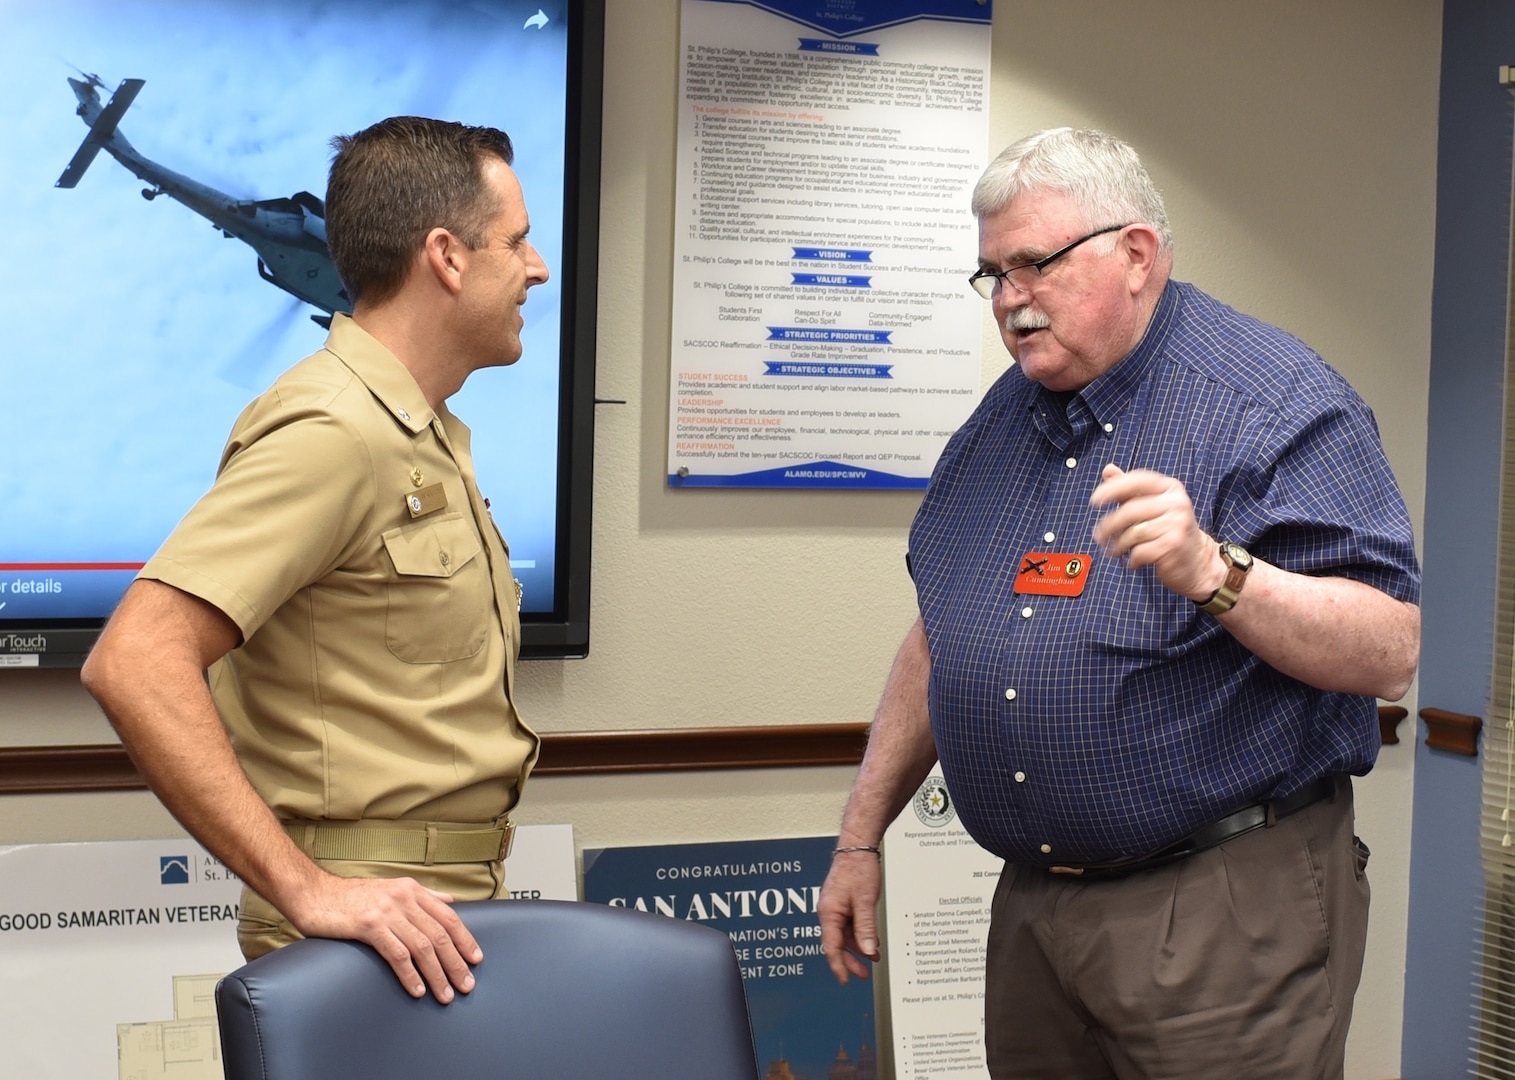 Retired Army Maj. James Cunningham, federal and state legislator for the Military Officers Association of America-Alamo Chapter, speaks with Cmdr. Nicholas Gamiz, commanding officer of Navy Recruiting District San Antonio, during a Recruiting District Assistance Council meeting held at St. Philip's College's Good Samaritan Veterans Outreach and Transition Center Sept. 26. RDAC members assist Navy recruiting by joining talents available in Navy-related organizations, the civilian community, and the Naval Reserve.